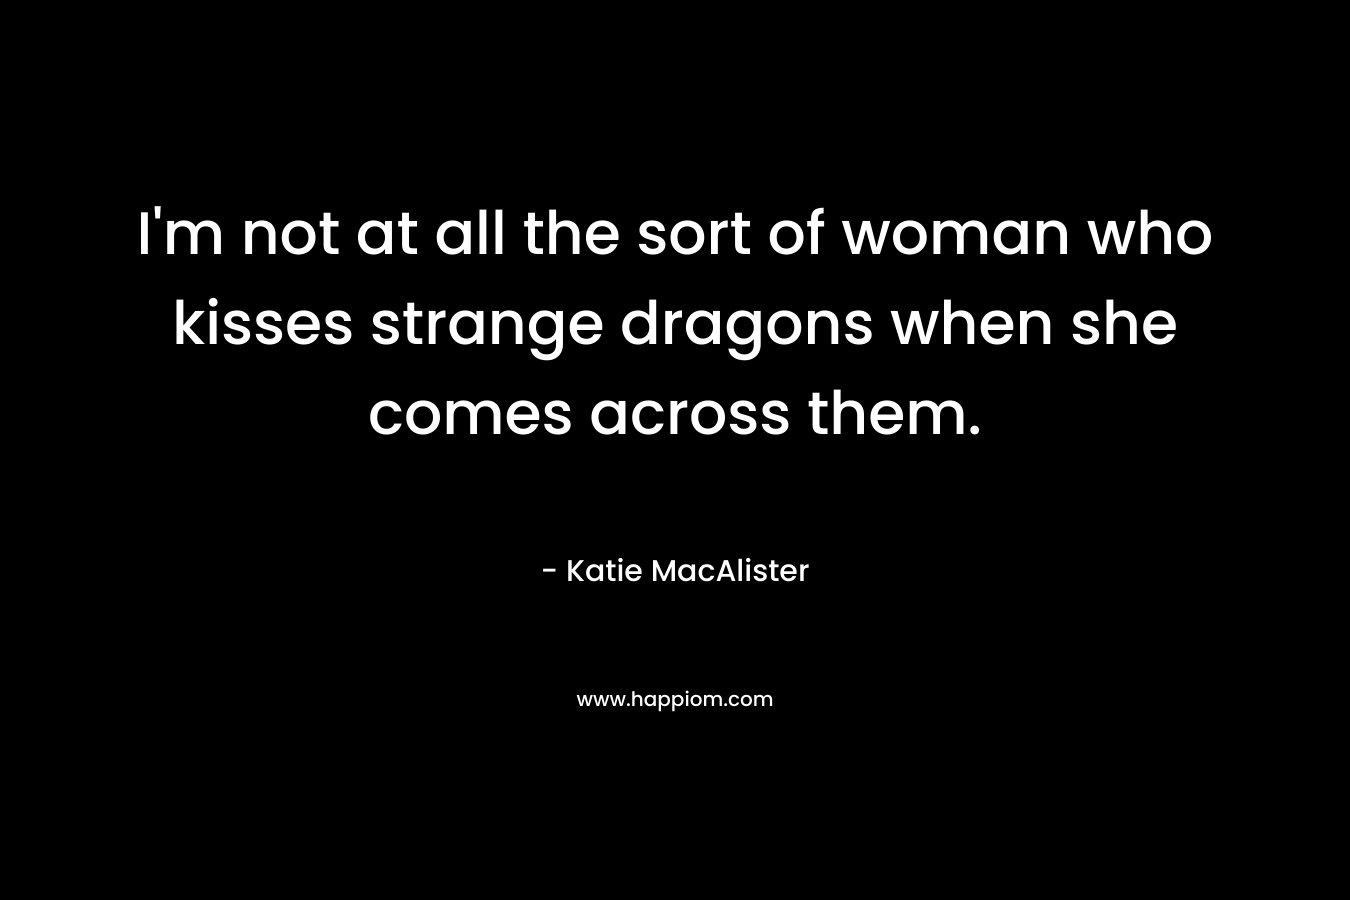 I'm not at all the sort of woman who kisses strange dragons when she comes across them.